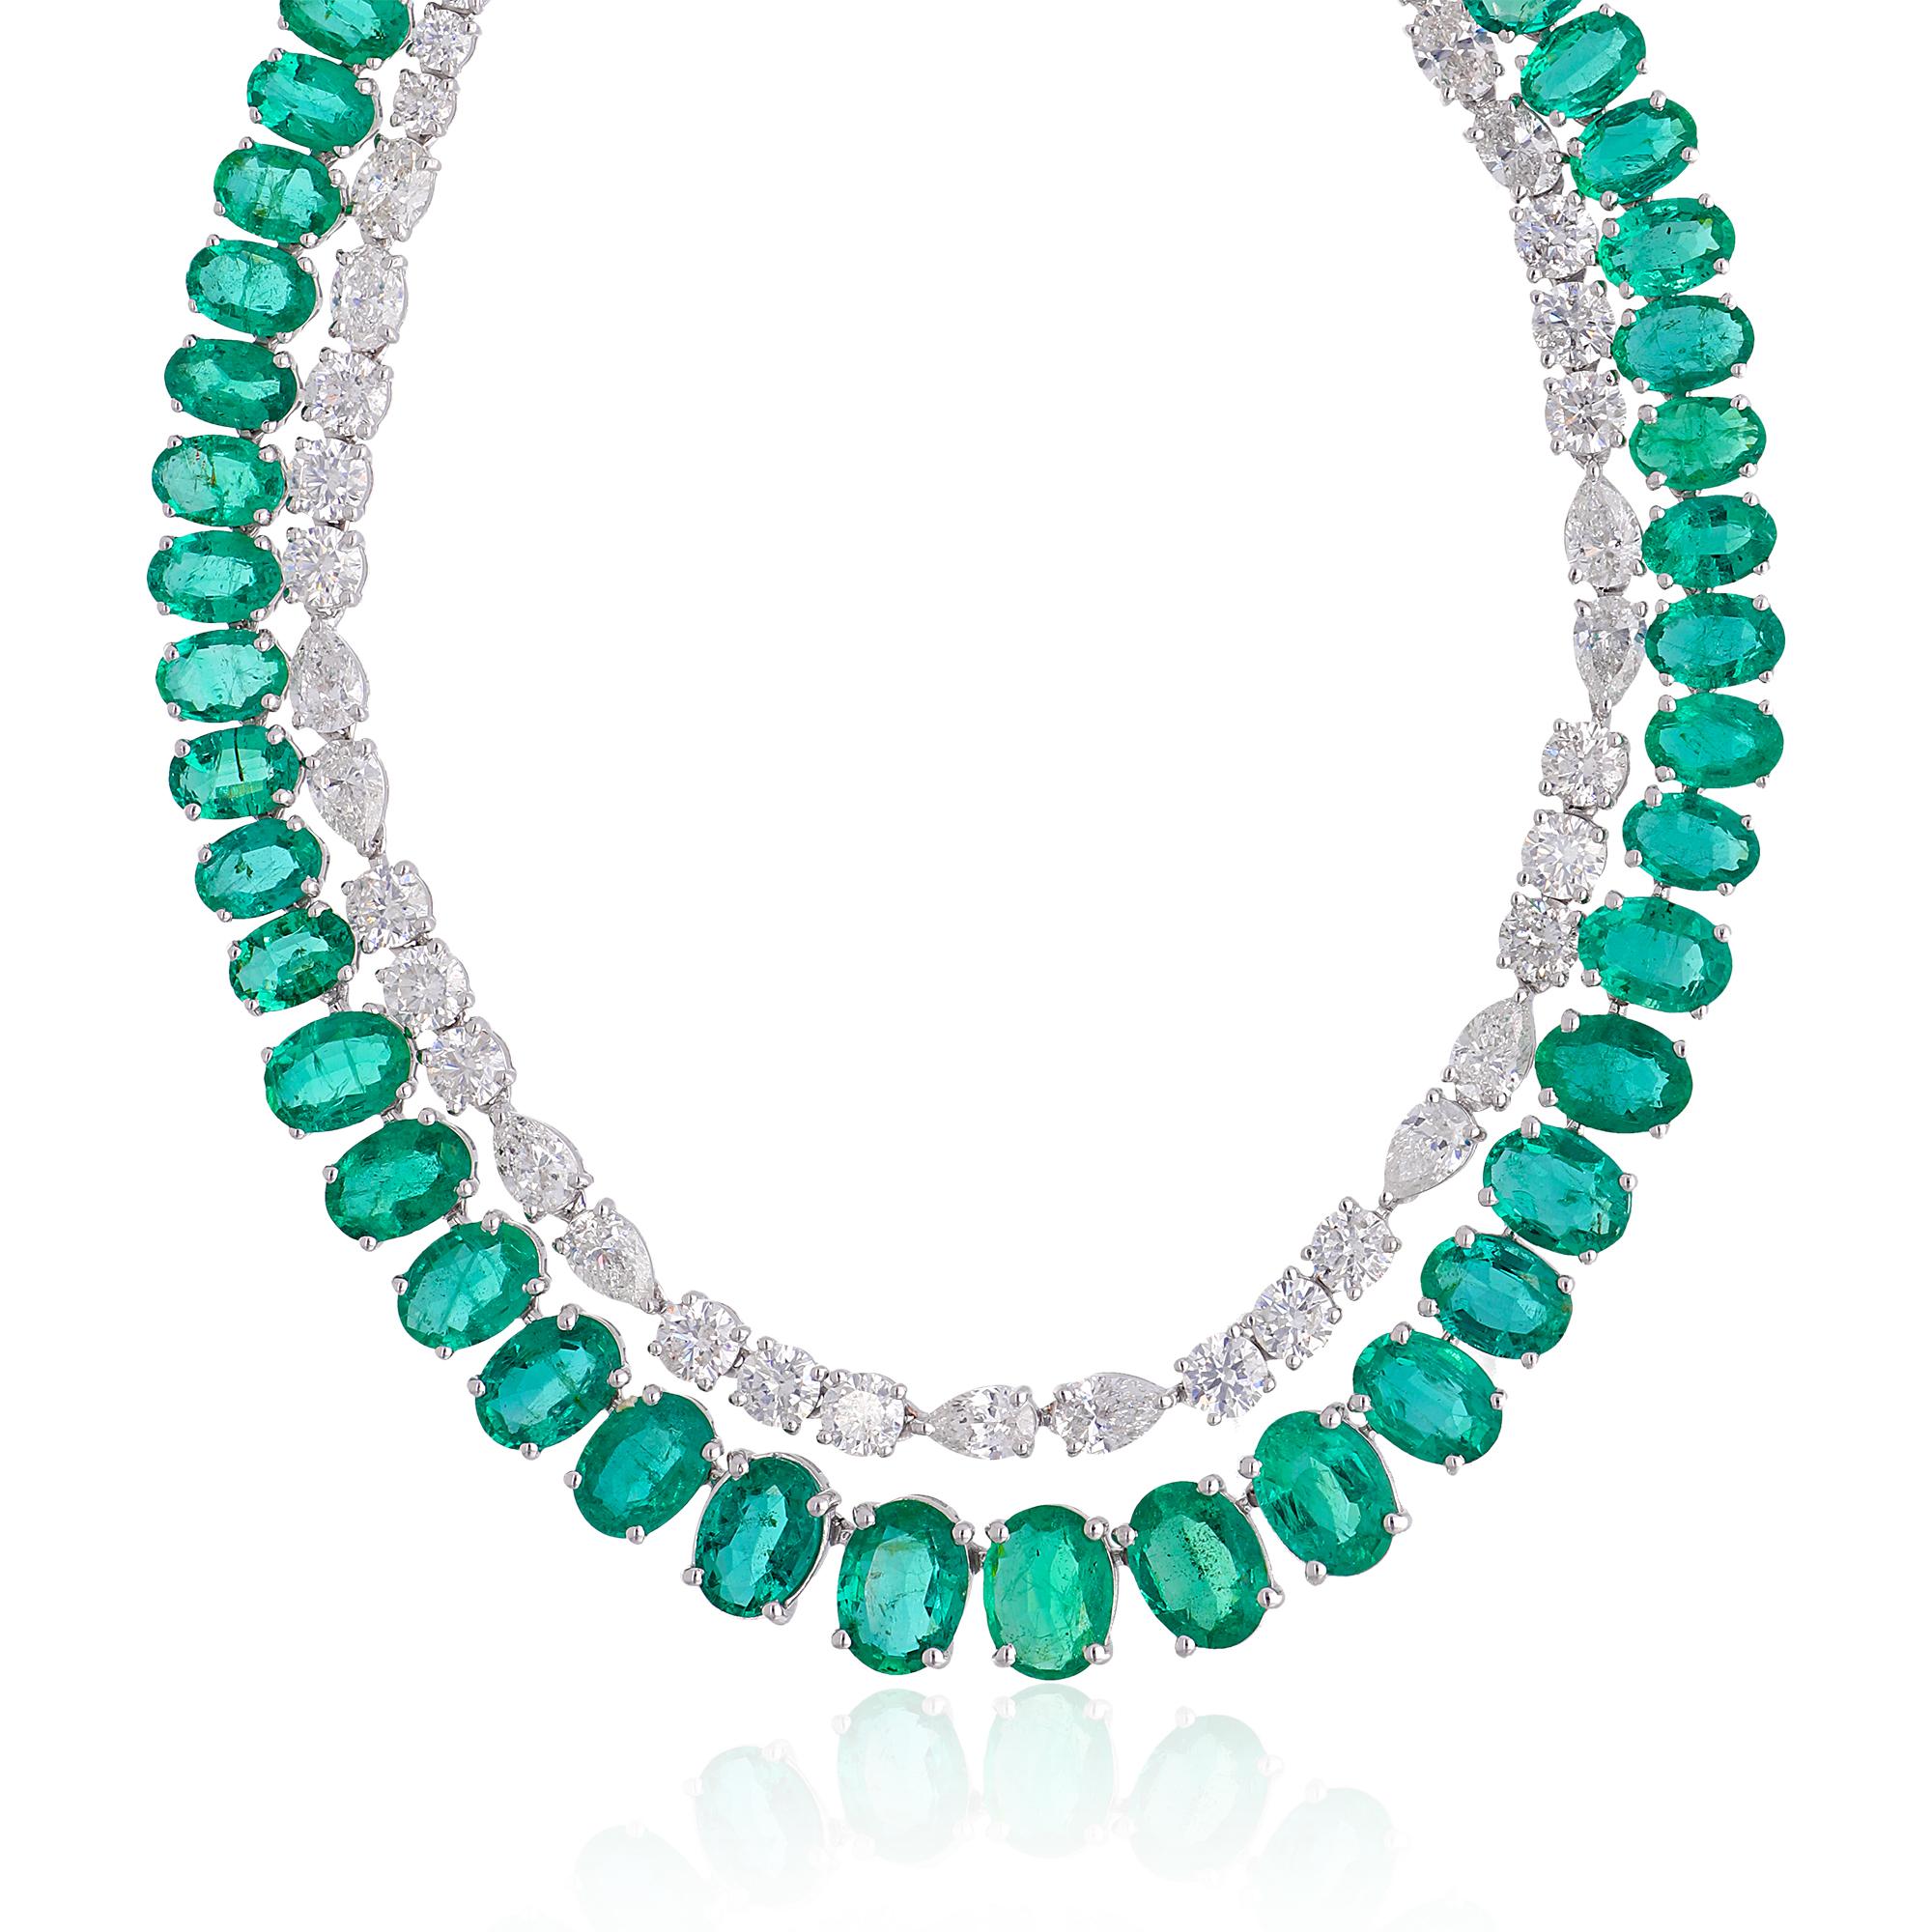 The centerpiece of this necklace is the remarkable oval-cut natural emerald gemstone. Known for its vibrant green color and mesmerizing allure, the emerald exudes a sense of luxury and natural beauty. Carefully selected for its exceptional quality,